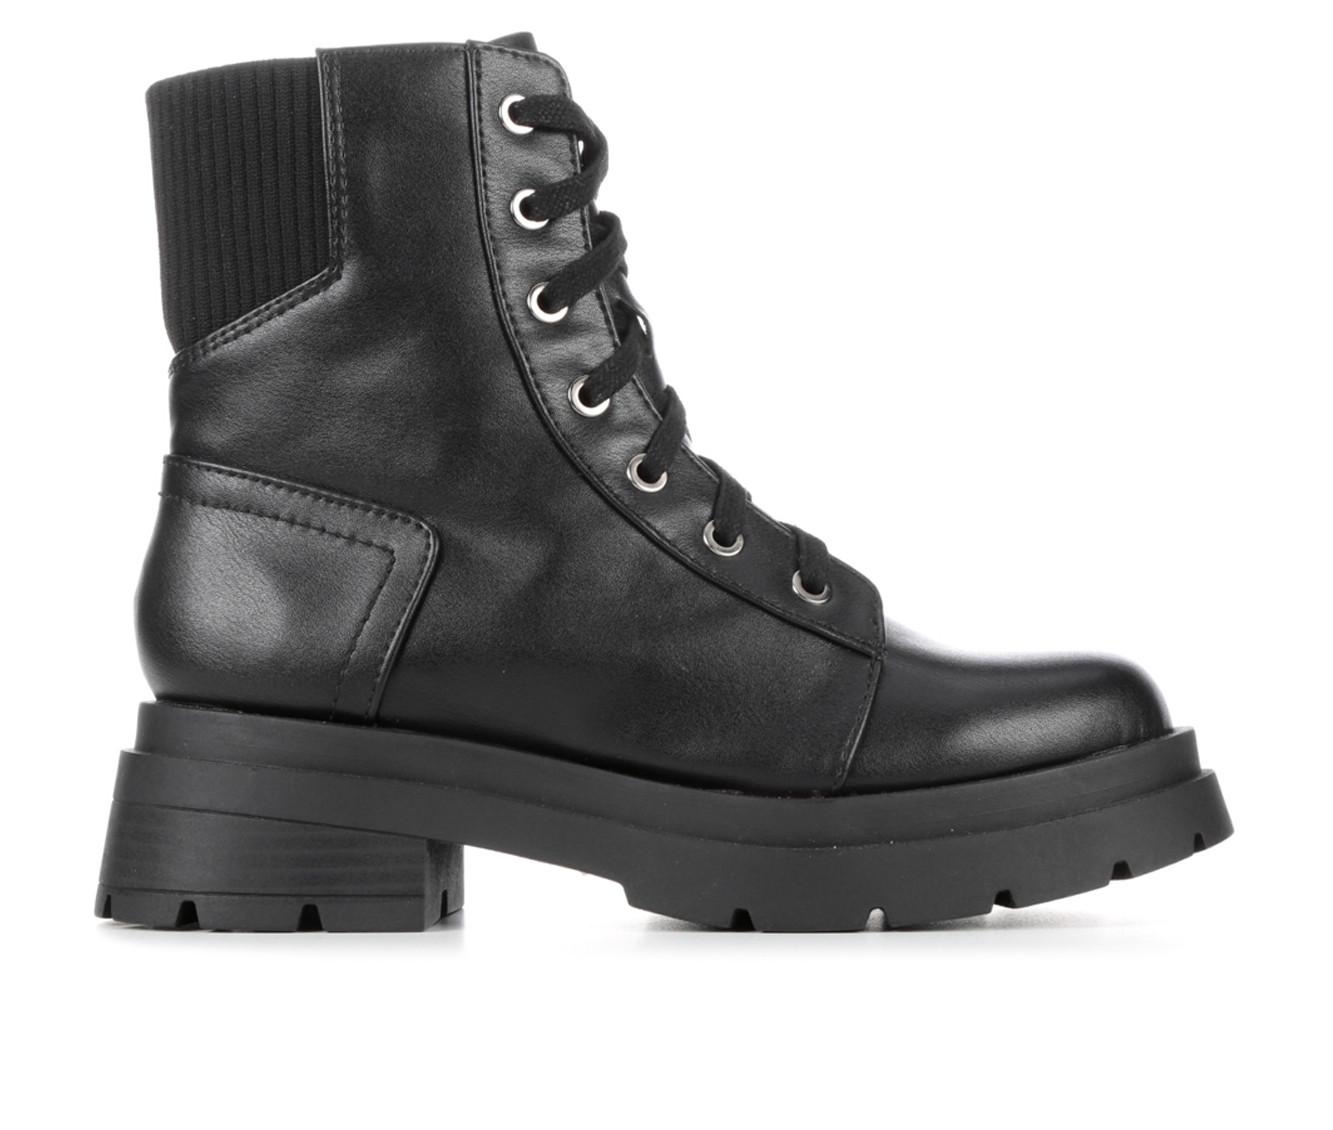 Combat Boots for Women, Lace-Up Boots